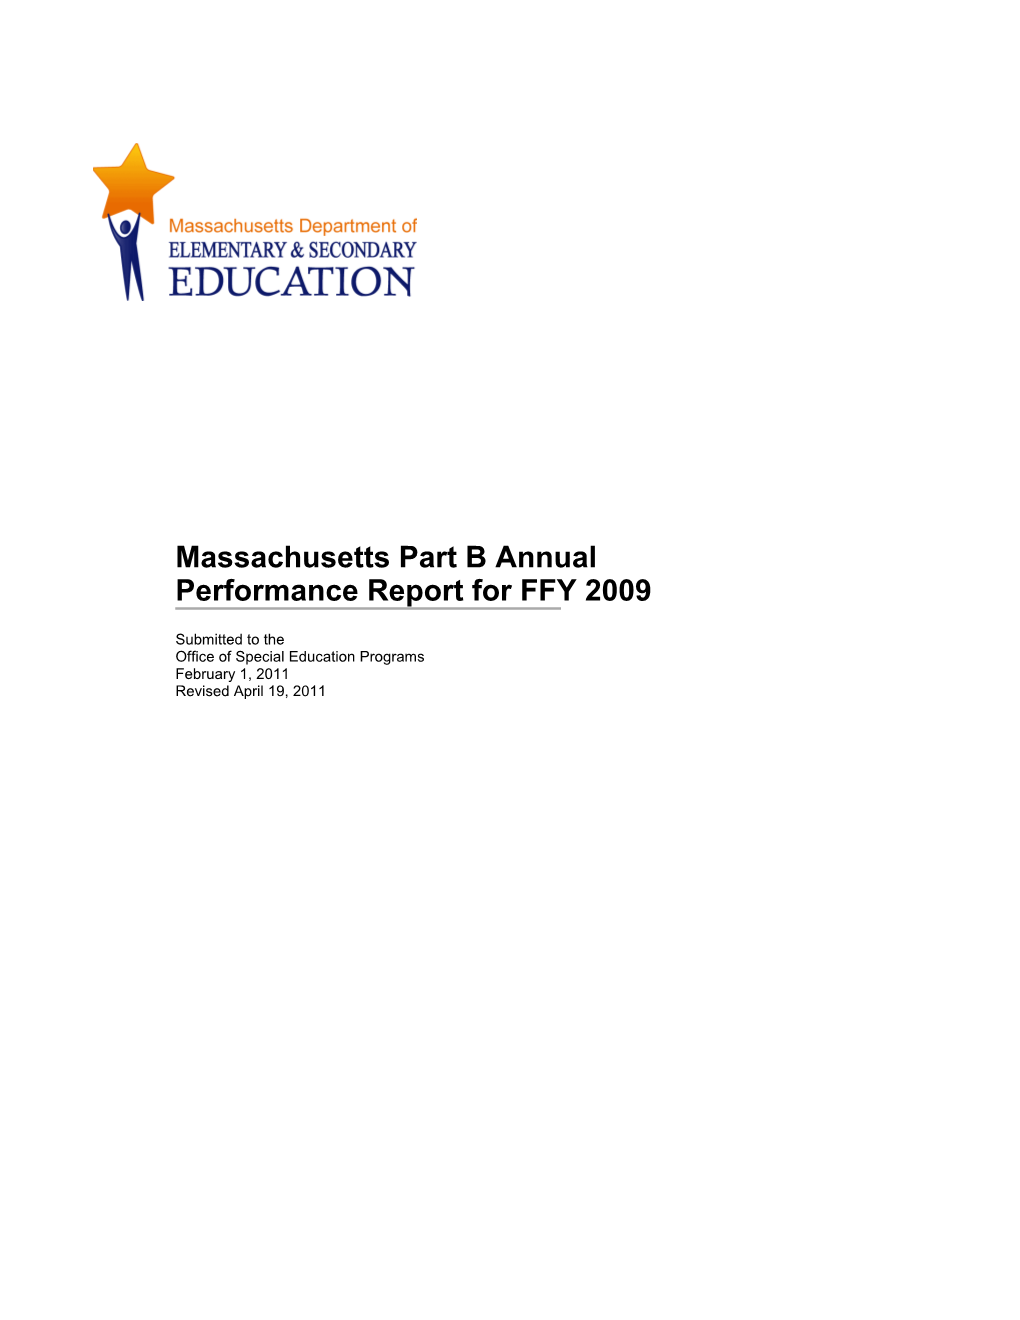 MA Annual Performance Report for FFY 2009, Revised April 19, 2011